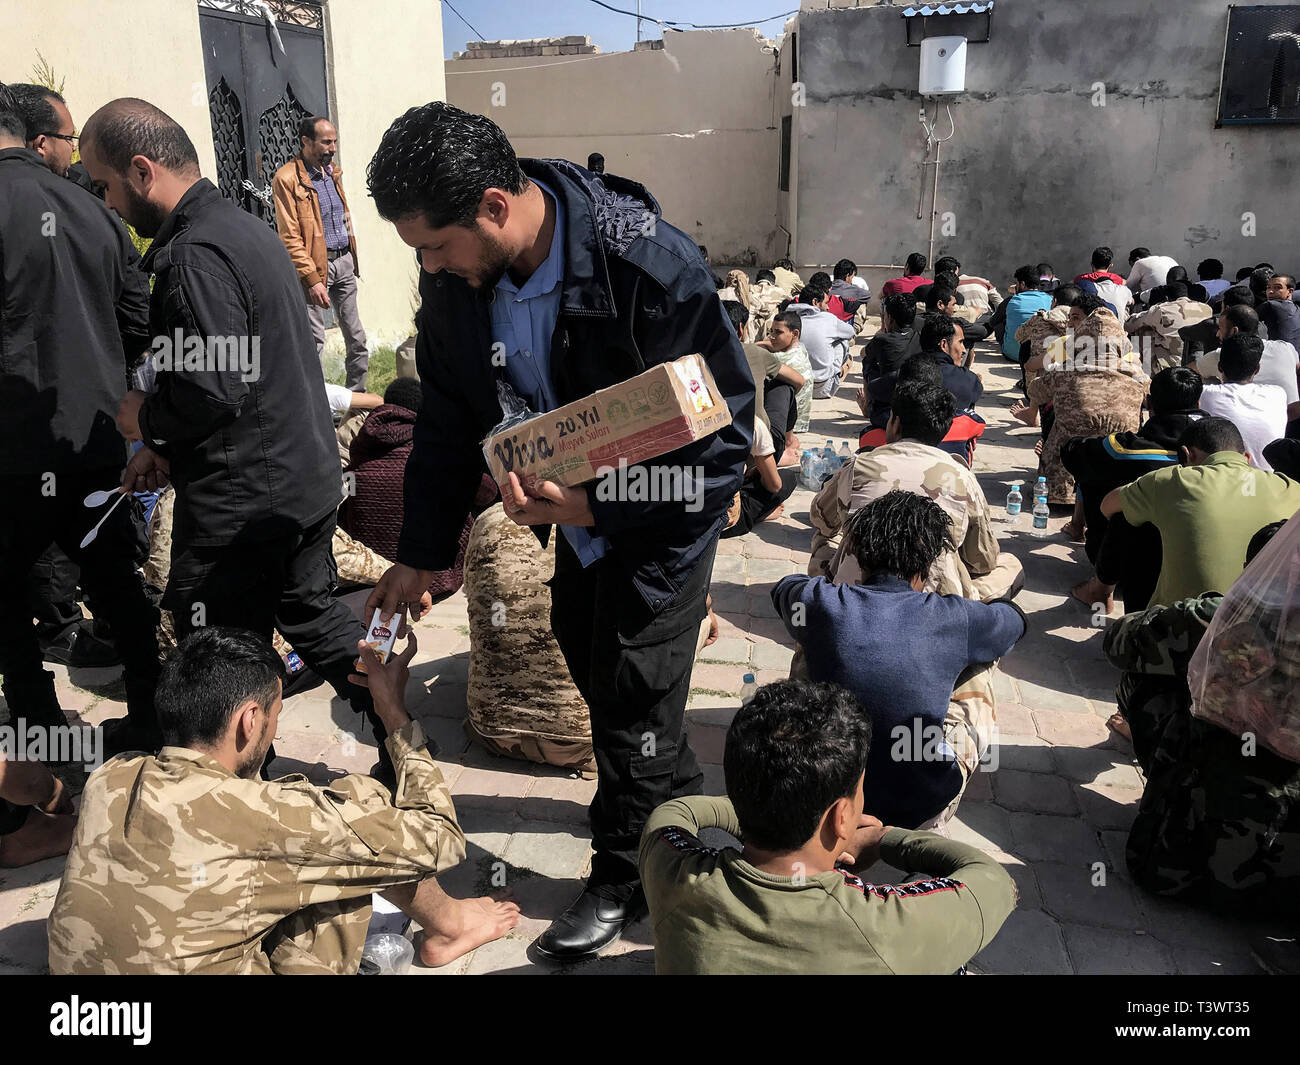 Zawia, Libya. 11th Apr, 2019. Libyan fighters loyal to the self-styled  Libyan National Army (LNA), led by Libyan strongman Khalifa Haftar, queue  on the ground at a detention centre while receiving food,